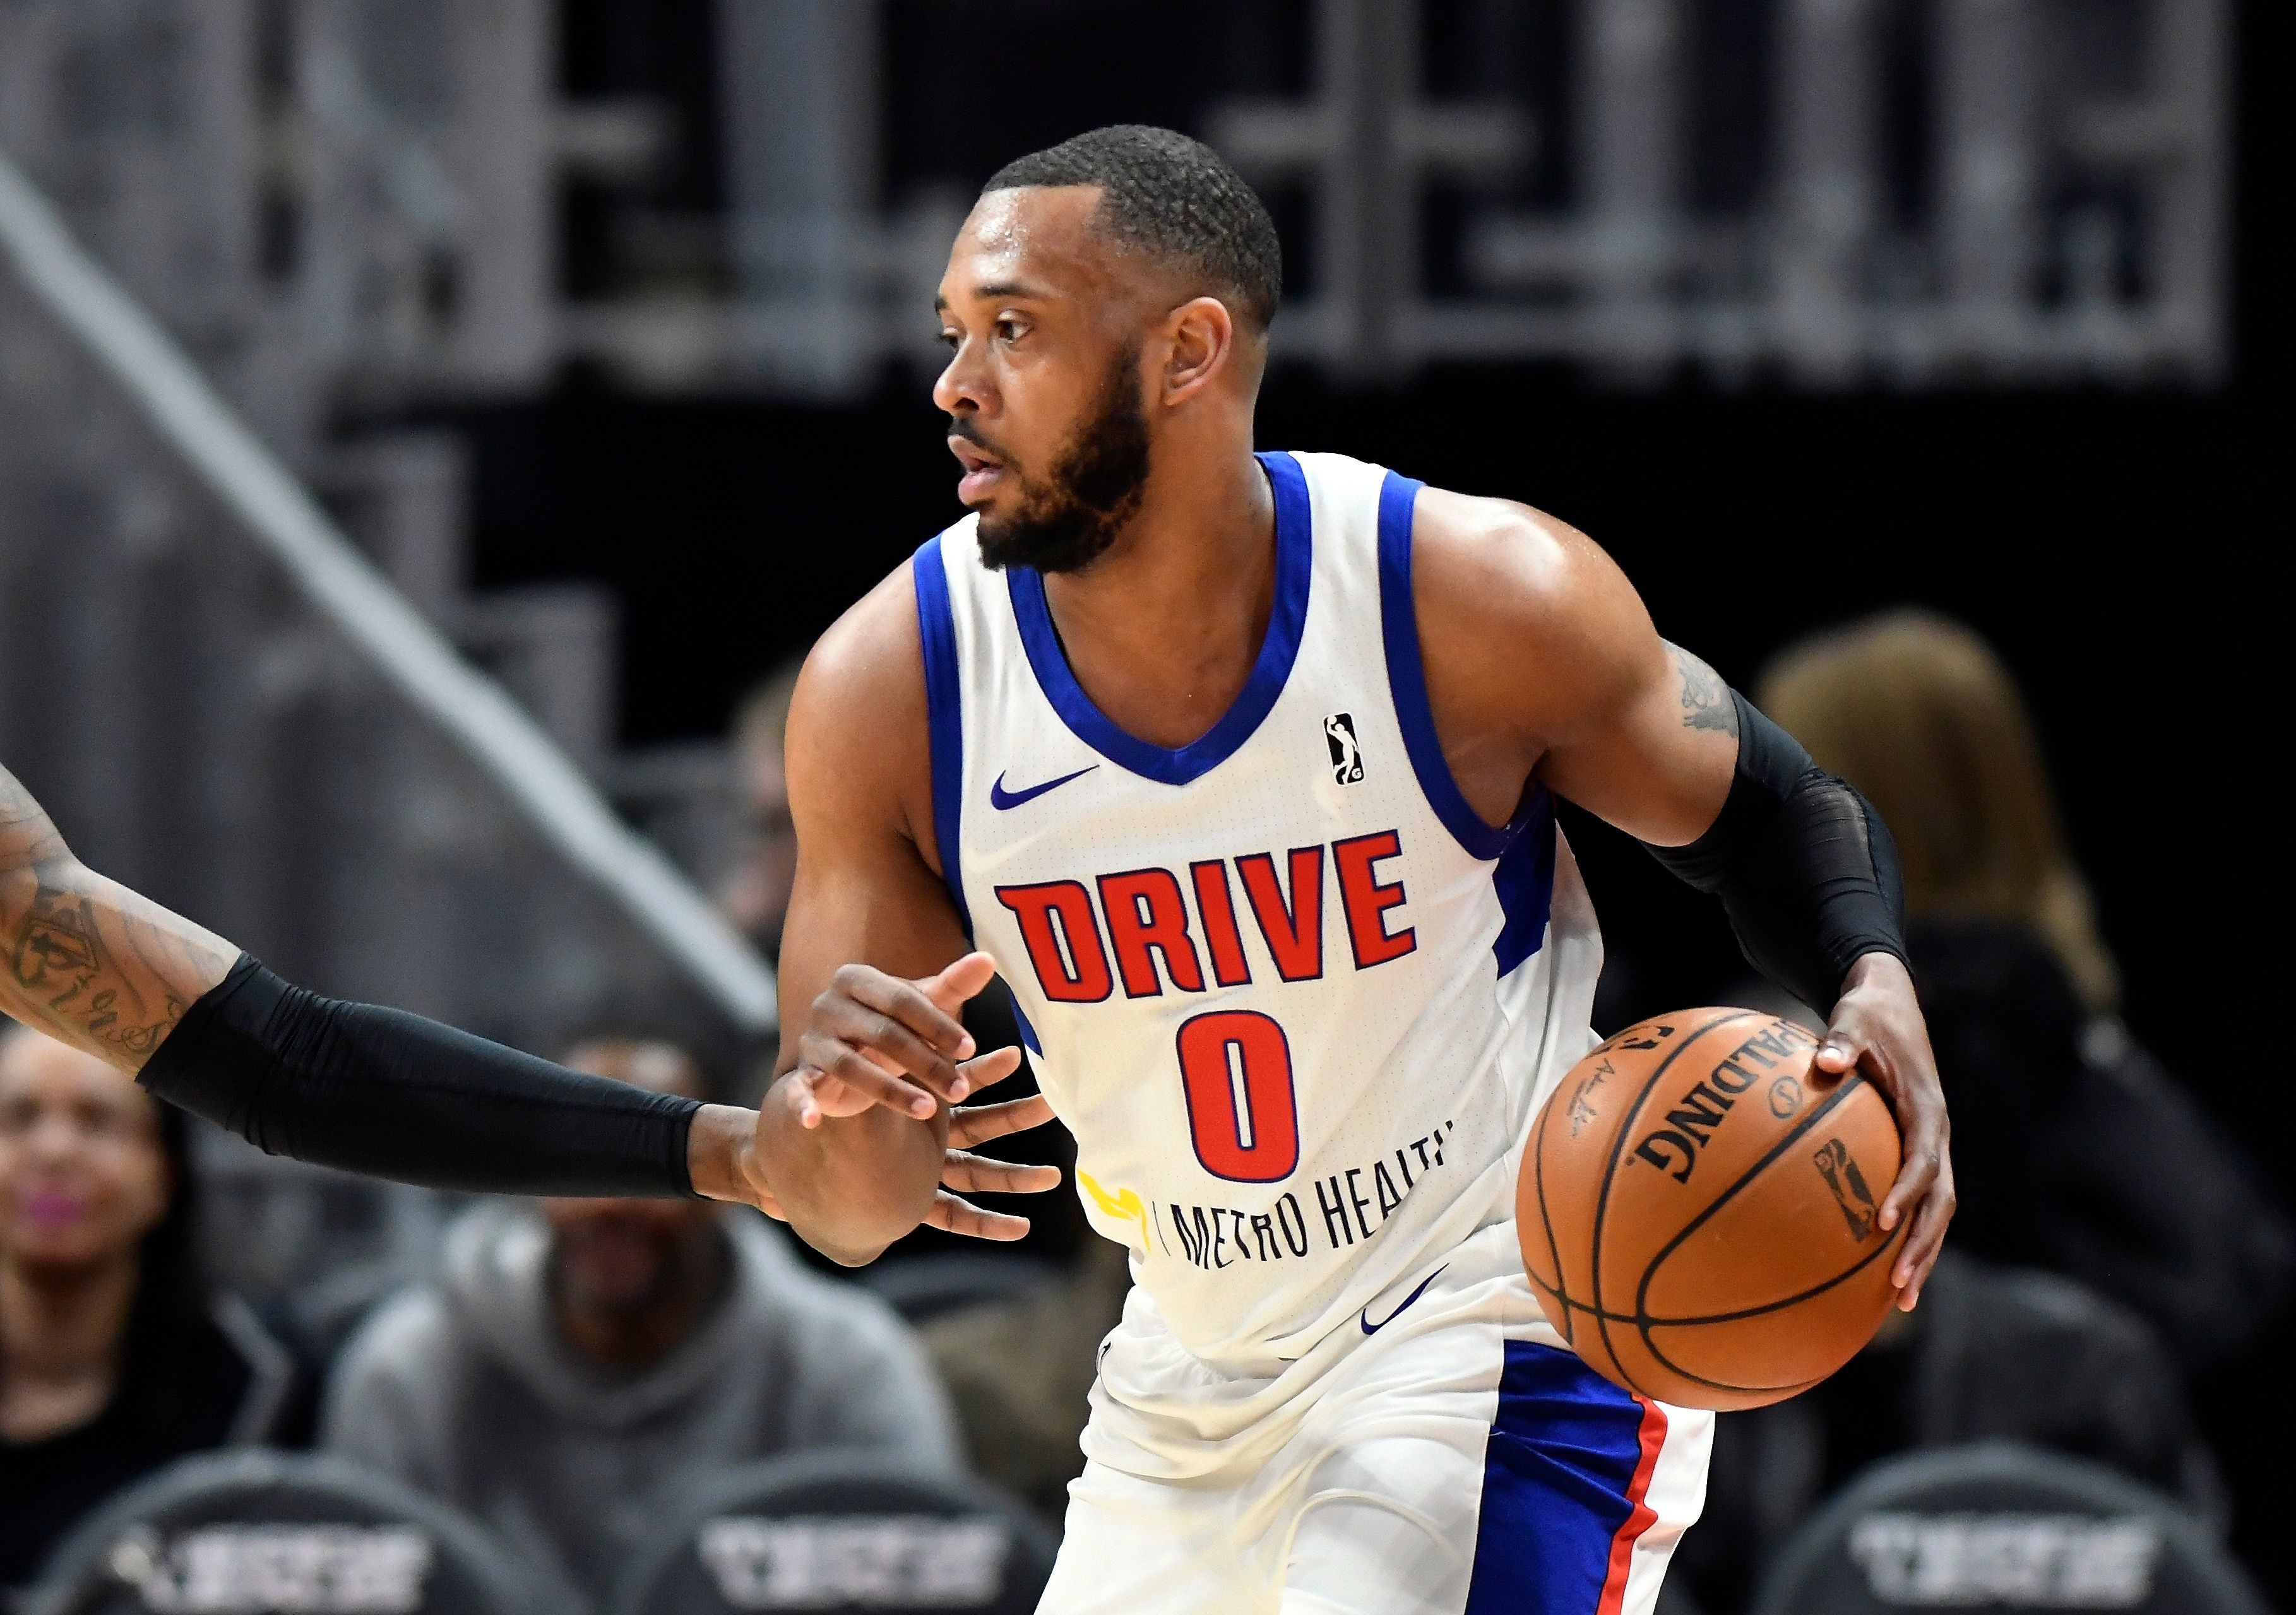 In a photo from Feb. 28, 2018, Grand Rapids Drive forward Zeke Upshaw looks to pass during a basketball game in Detroit. Upshaw, the Detroit Pistons developmental player who collapsed on the court during a NBA G League game in Michigan has died. The Grand Rapids Drive says 26-year-old Upshaw died at a hospital Monday, March 26, 2018. No cause was disclosed.